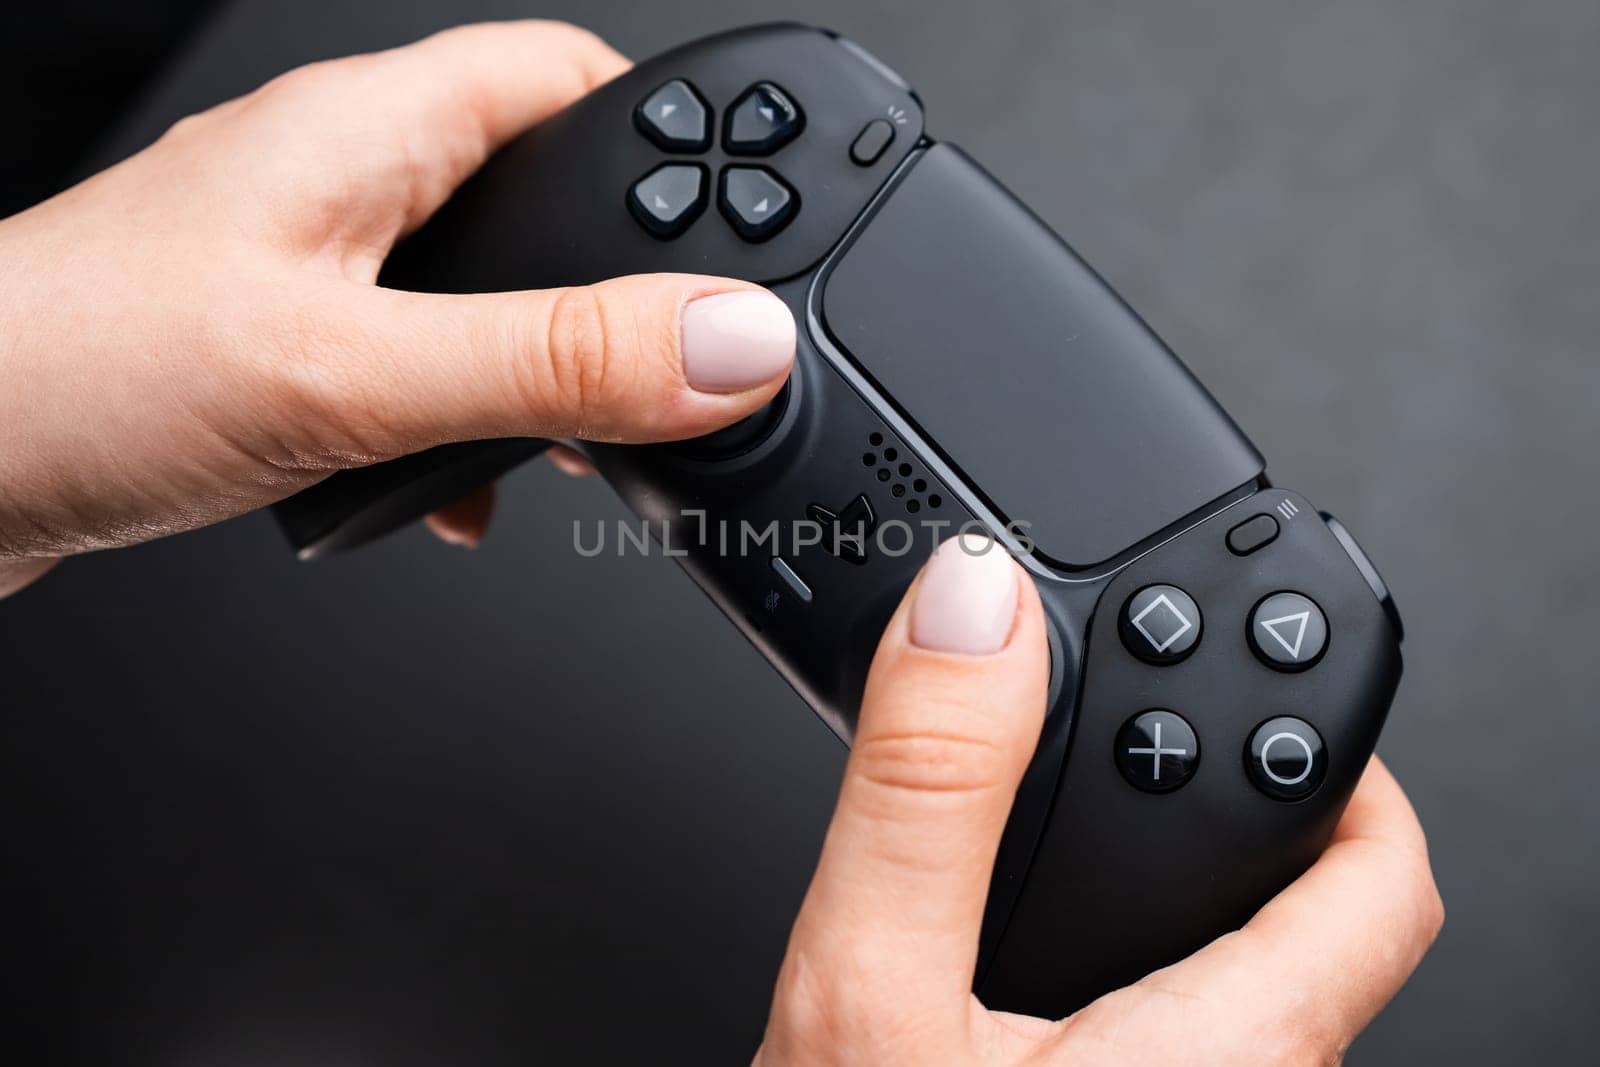 Nex generation game controller in womans hand on the black background by vladimka